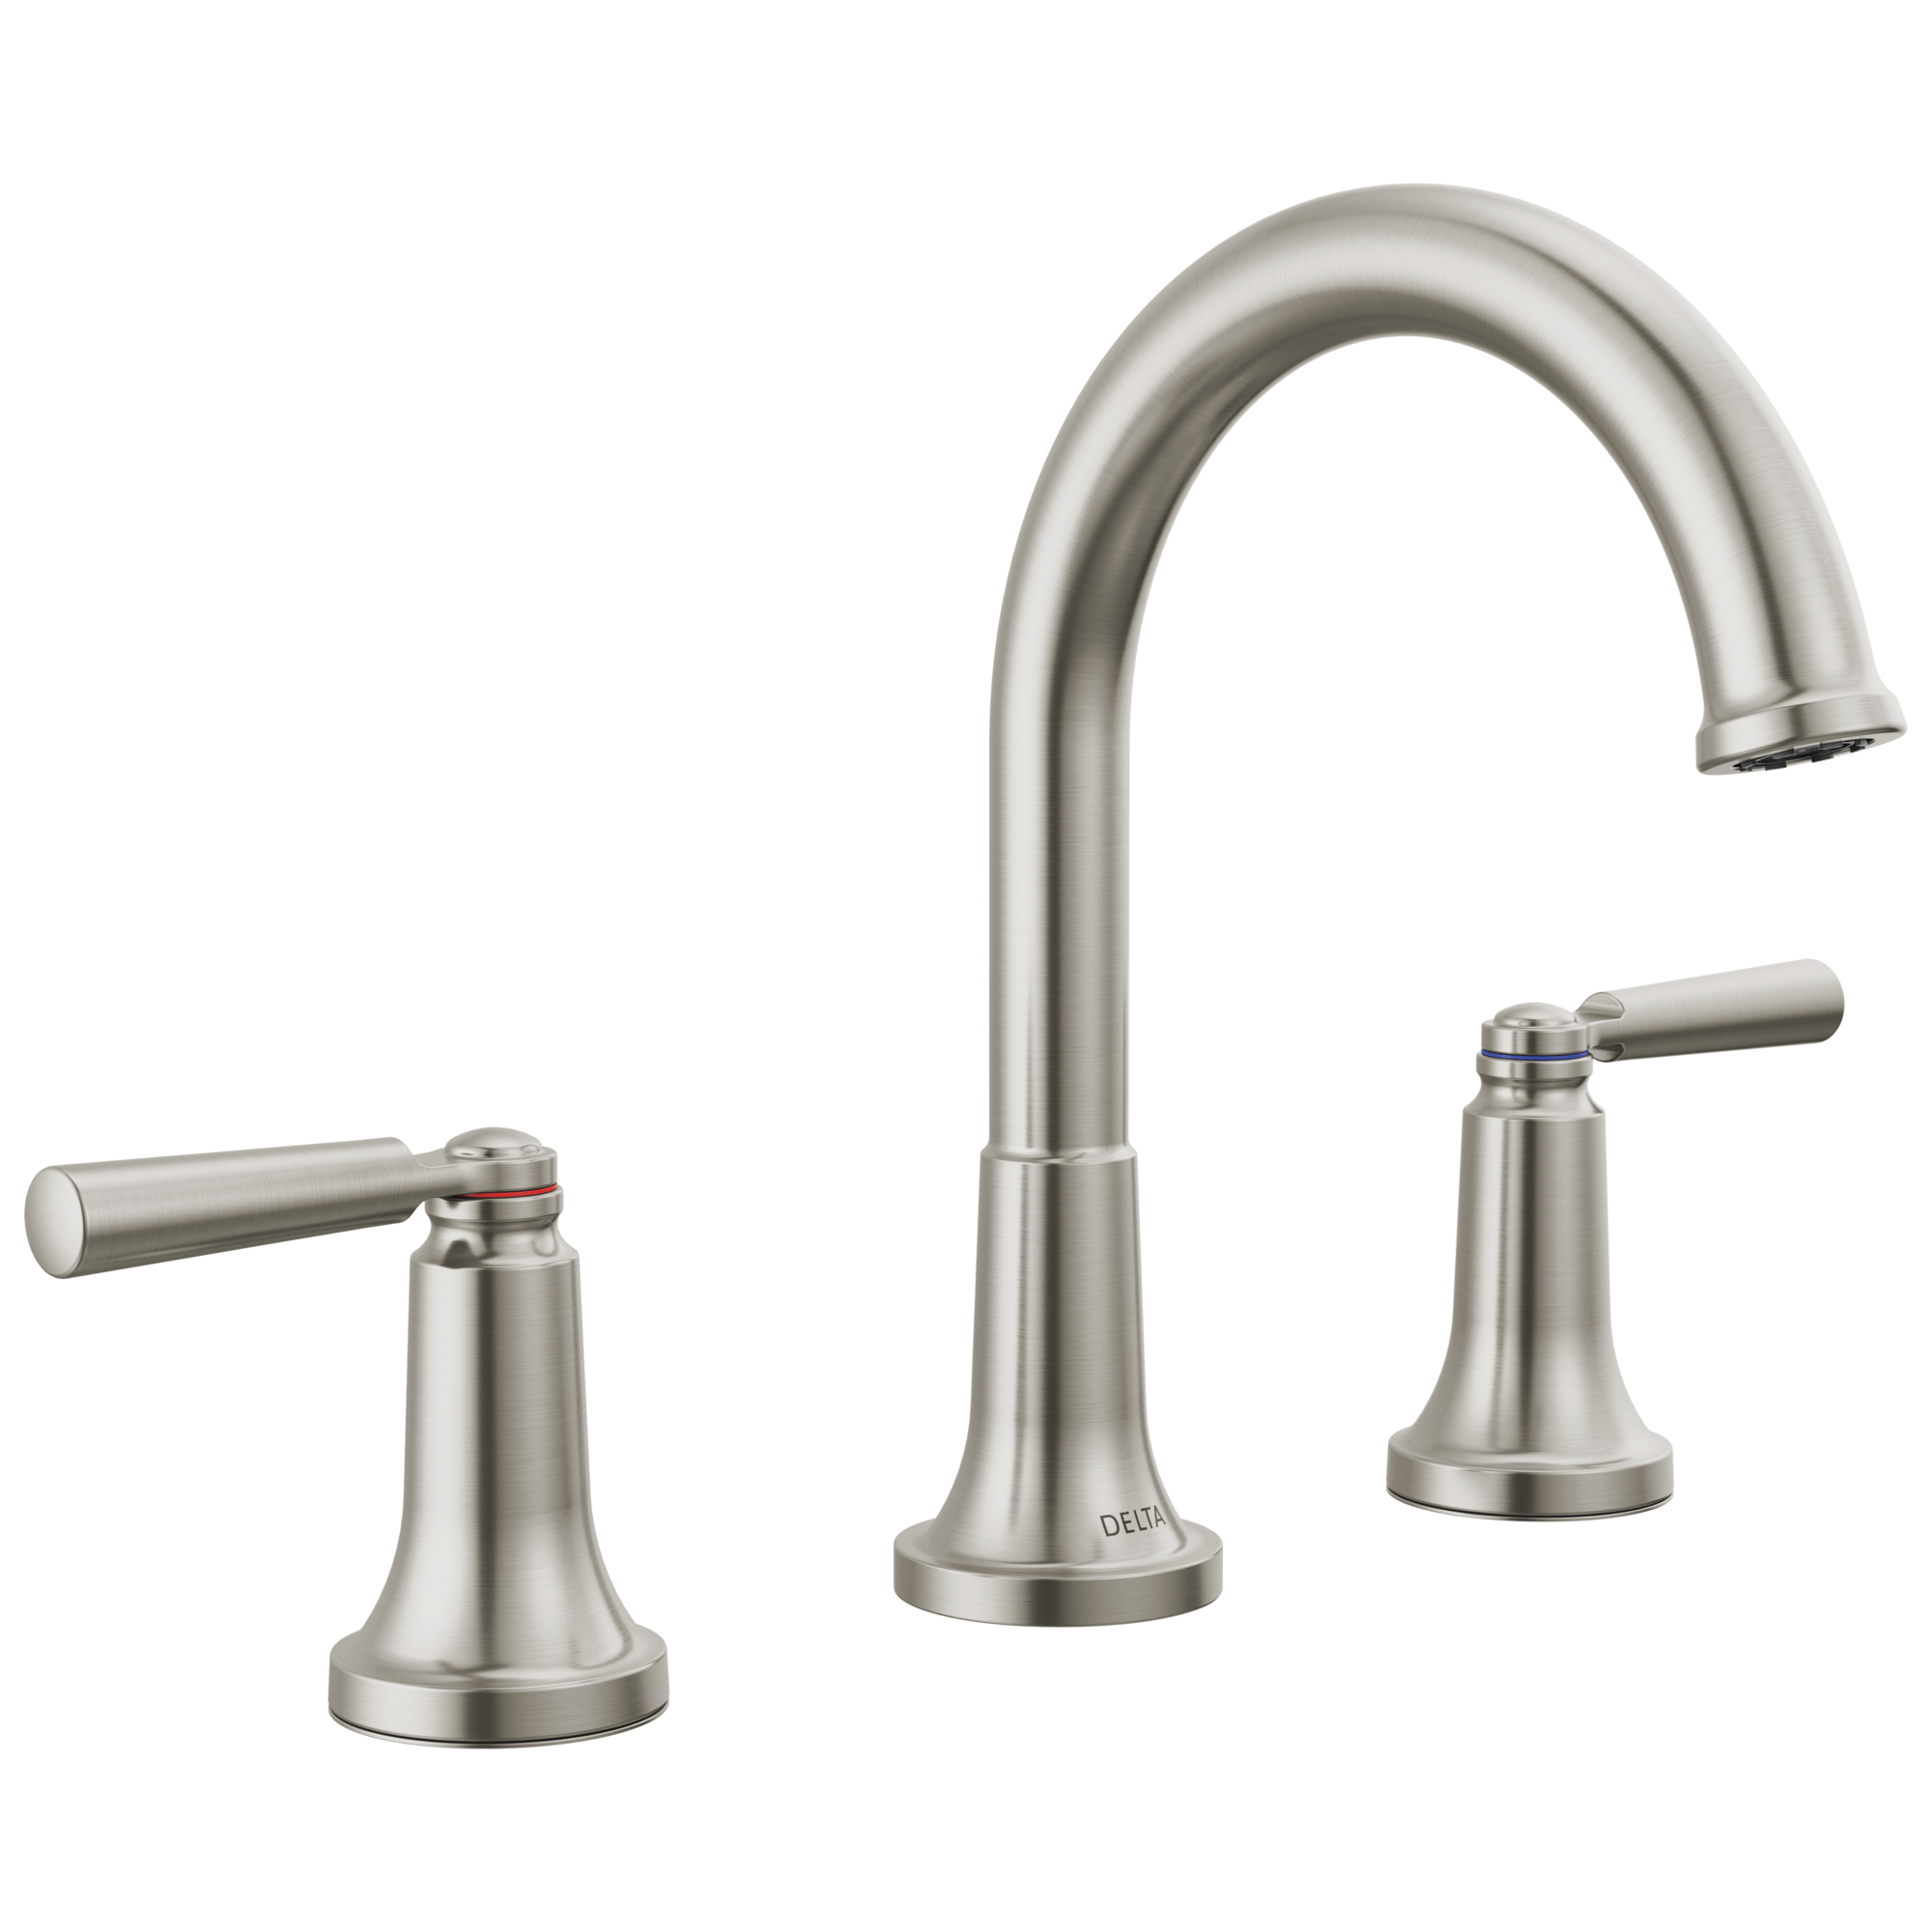 Delta Saylor: Two Handle Widespread Bathroom Faucet, Stainless